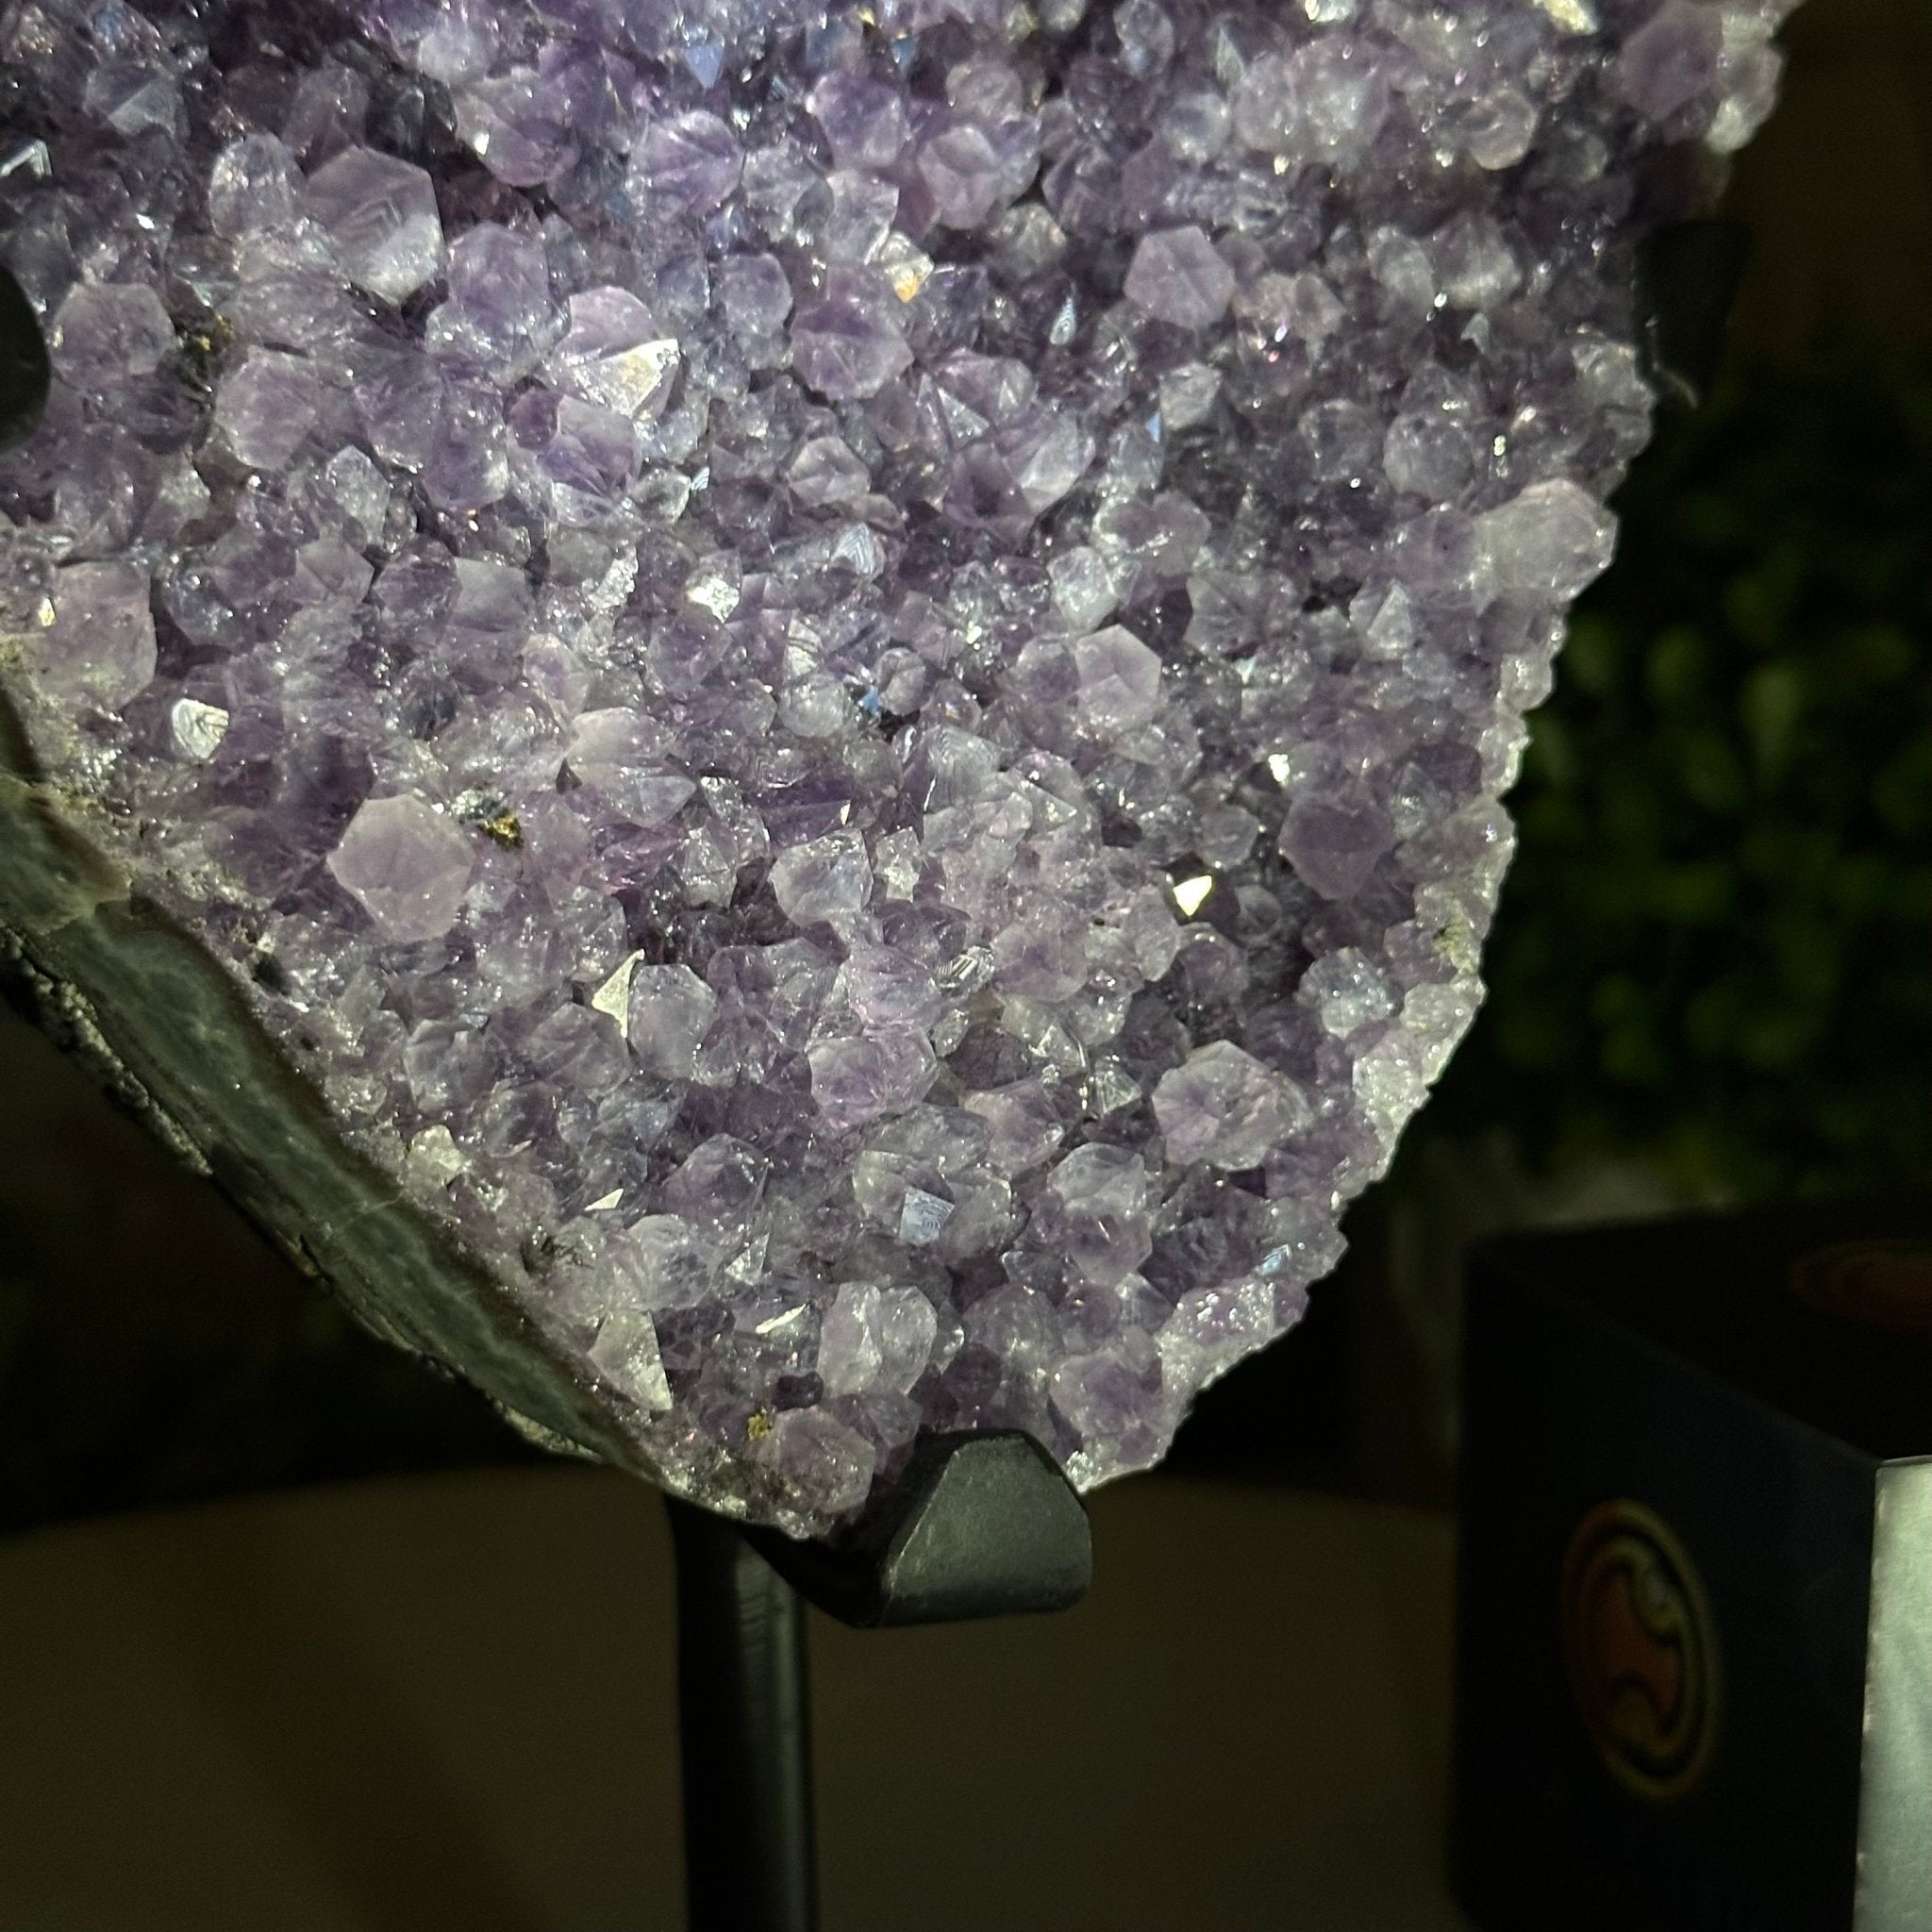 Quality Amethyst Cluster on a Metal Base, 7.2 lbs & 9.75" Tall #5491 - 0055 - Brazil GemsBrazil GemsQuality Amethyst Cluster on a Metal Base, 7.2 lbs & 9.75" Tall #5491 - 0055Clusters on Fixed Bases5491 - 0055